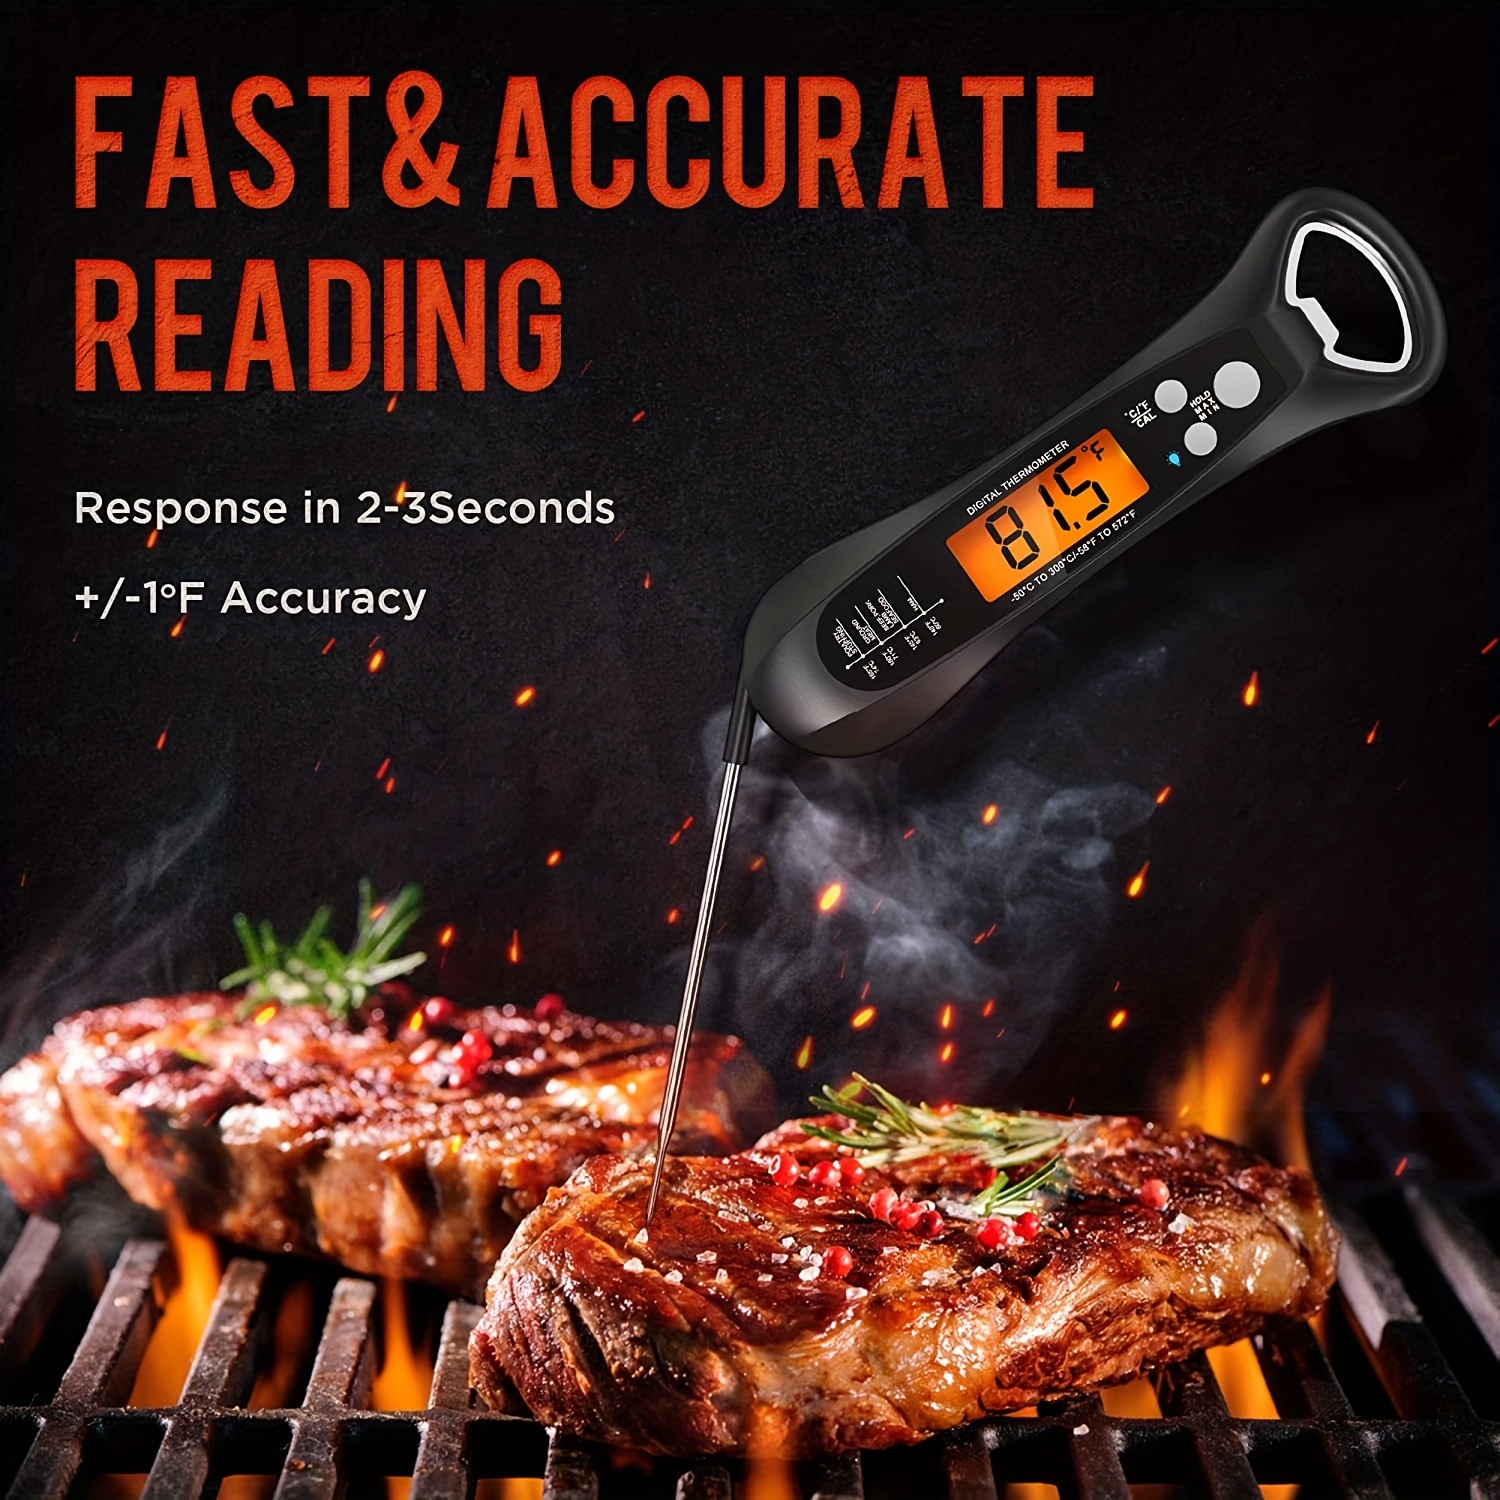 Instant Read Meat Thermometer for Grill and Cooking, Fast & Precise Digital  Food Thermometer with Backlight, Magnet, Calibration, and Foldable Probe